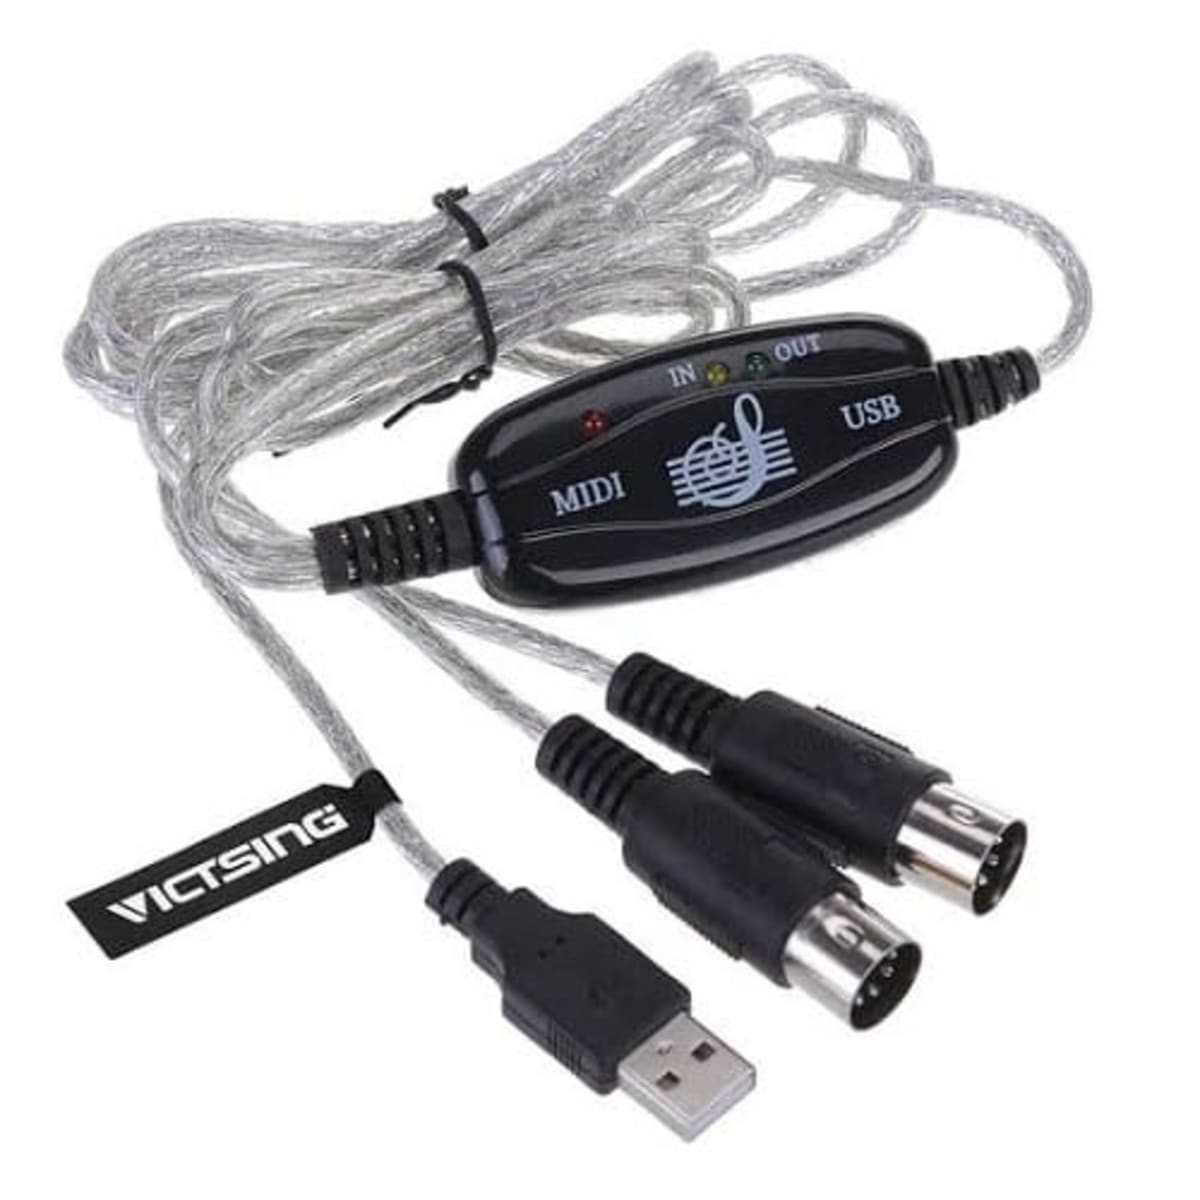 håber Mange Fængsling Usb In-out Midi Cable Converter | Konga Online Shopping